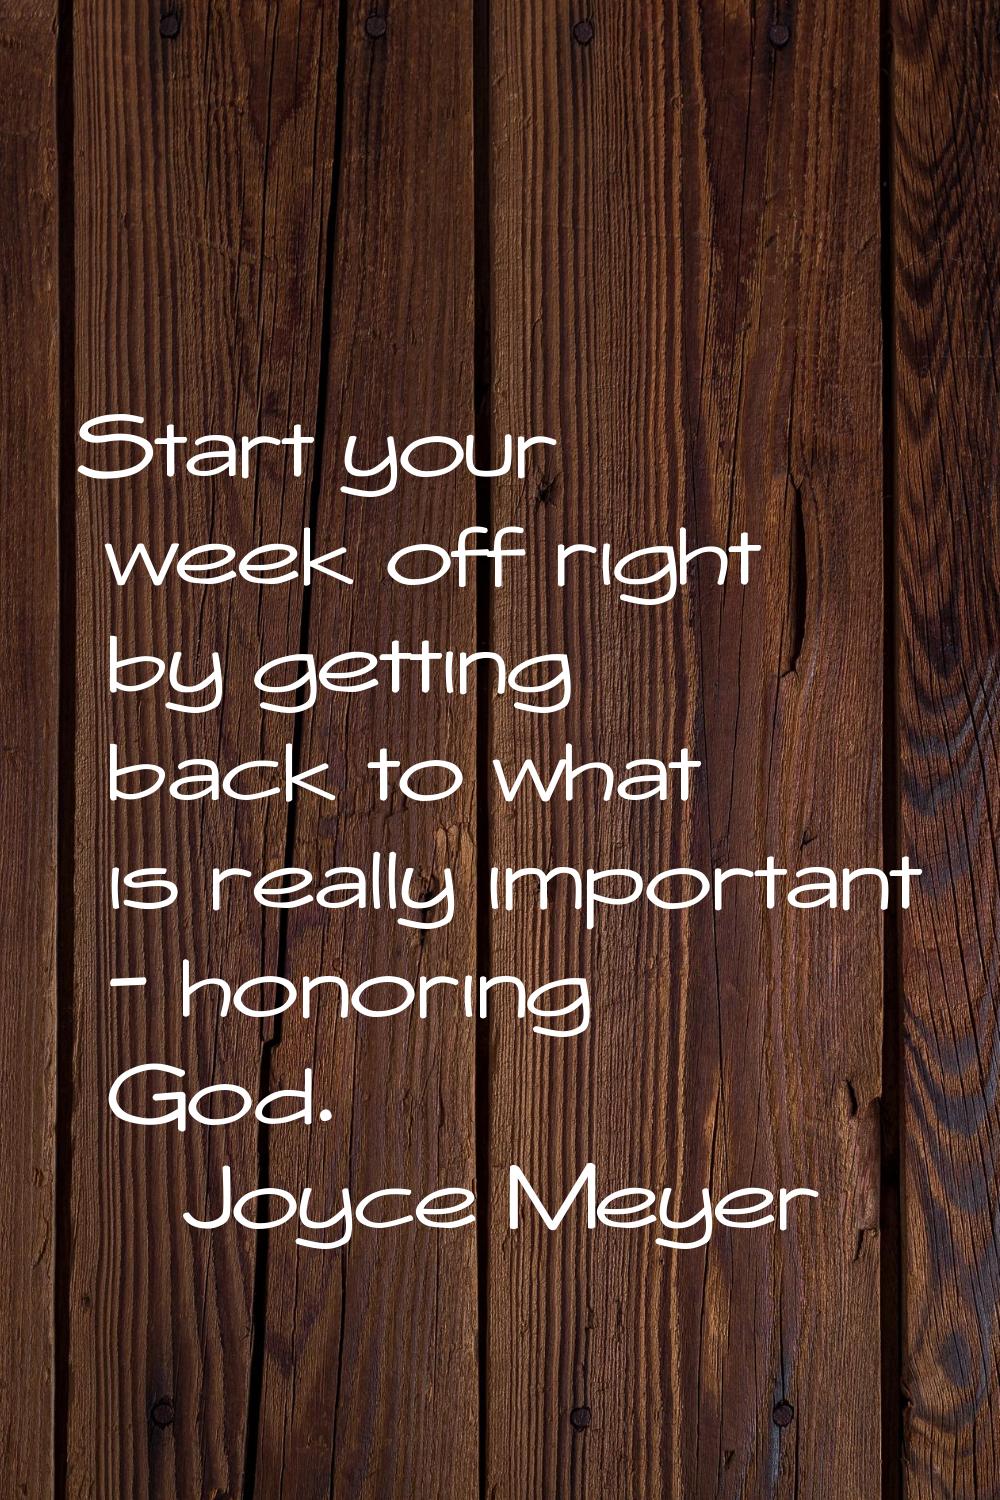 Start your week off right by getting back to what is really important - honoring God.